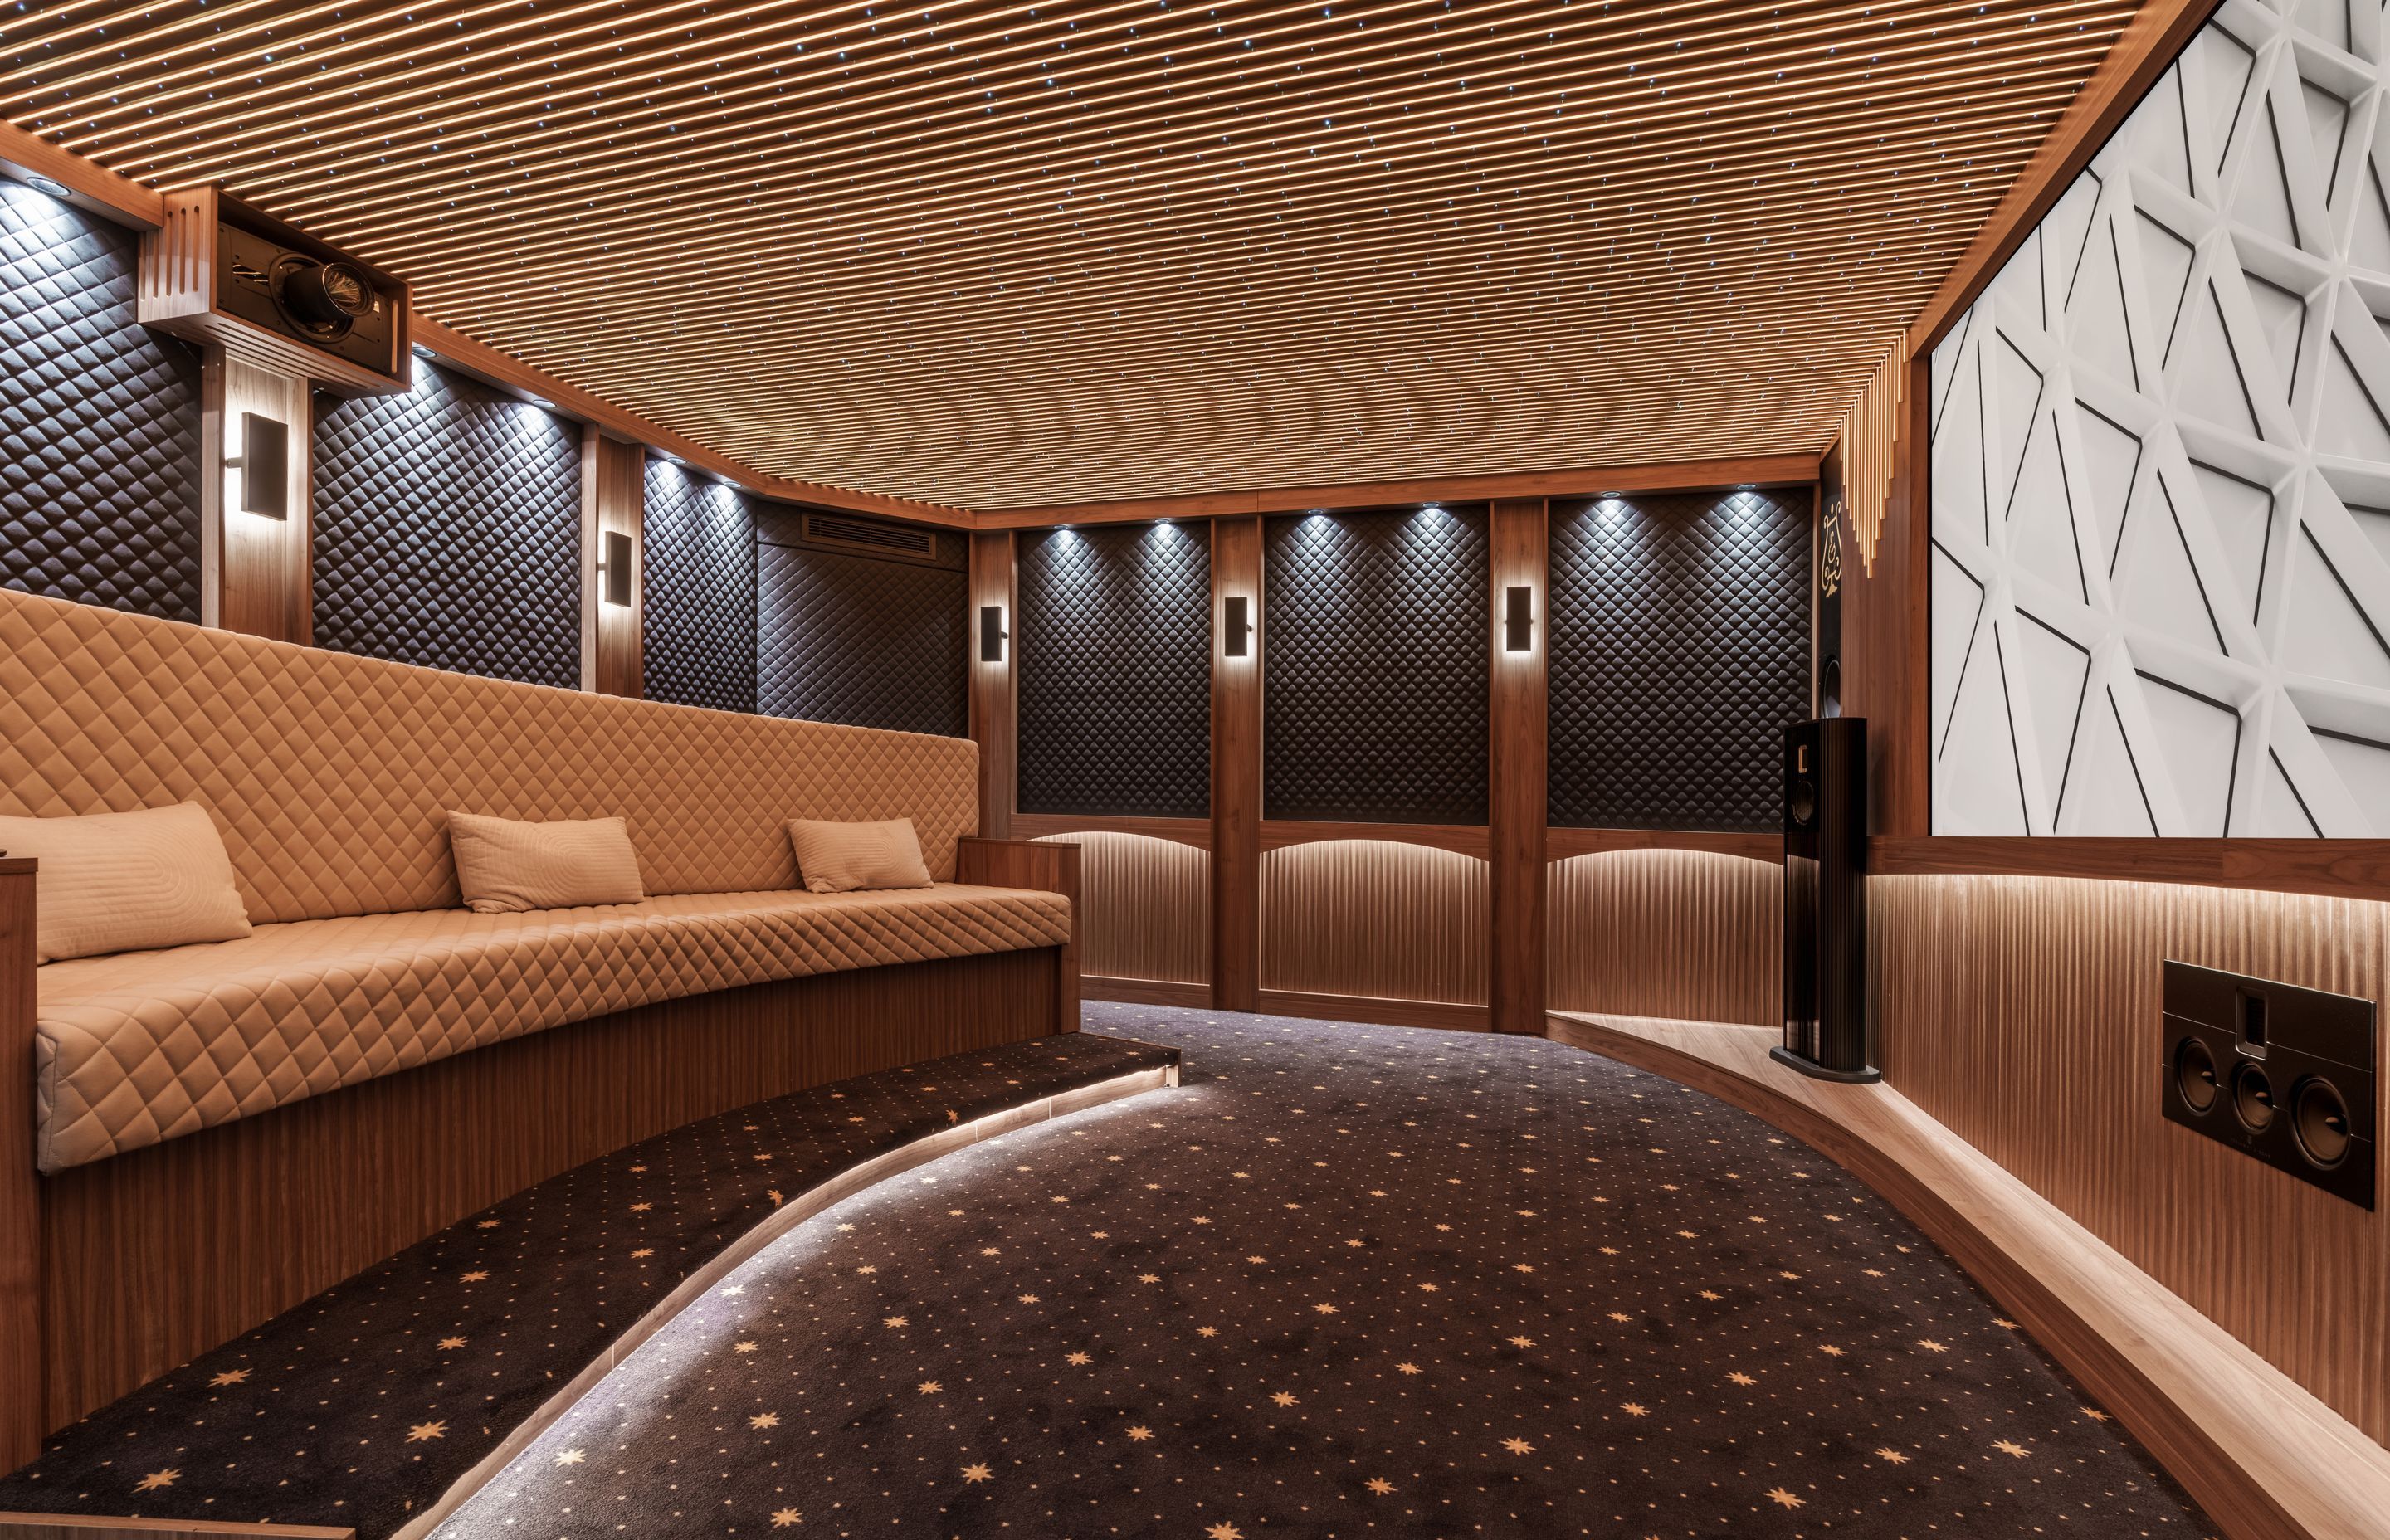 In this home theatre set-up, the projector is mounted high on the wall and projects onto the opposite wall.